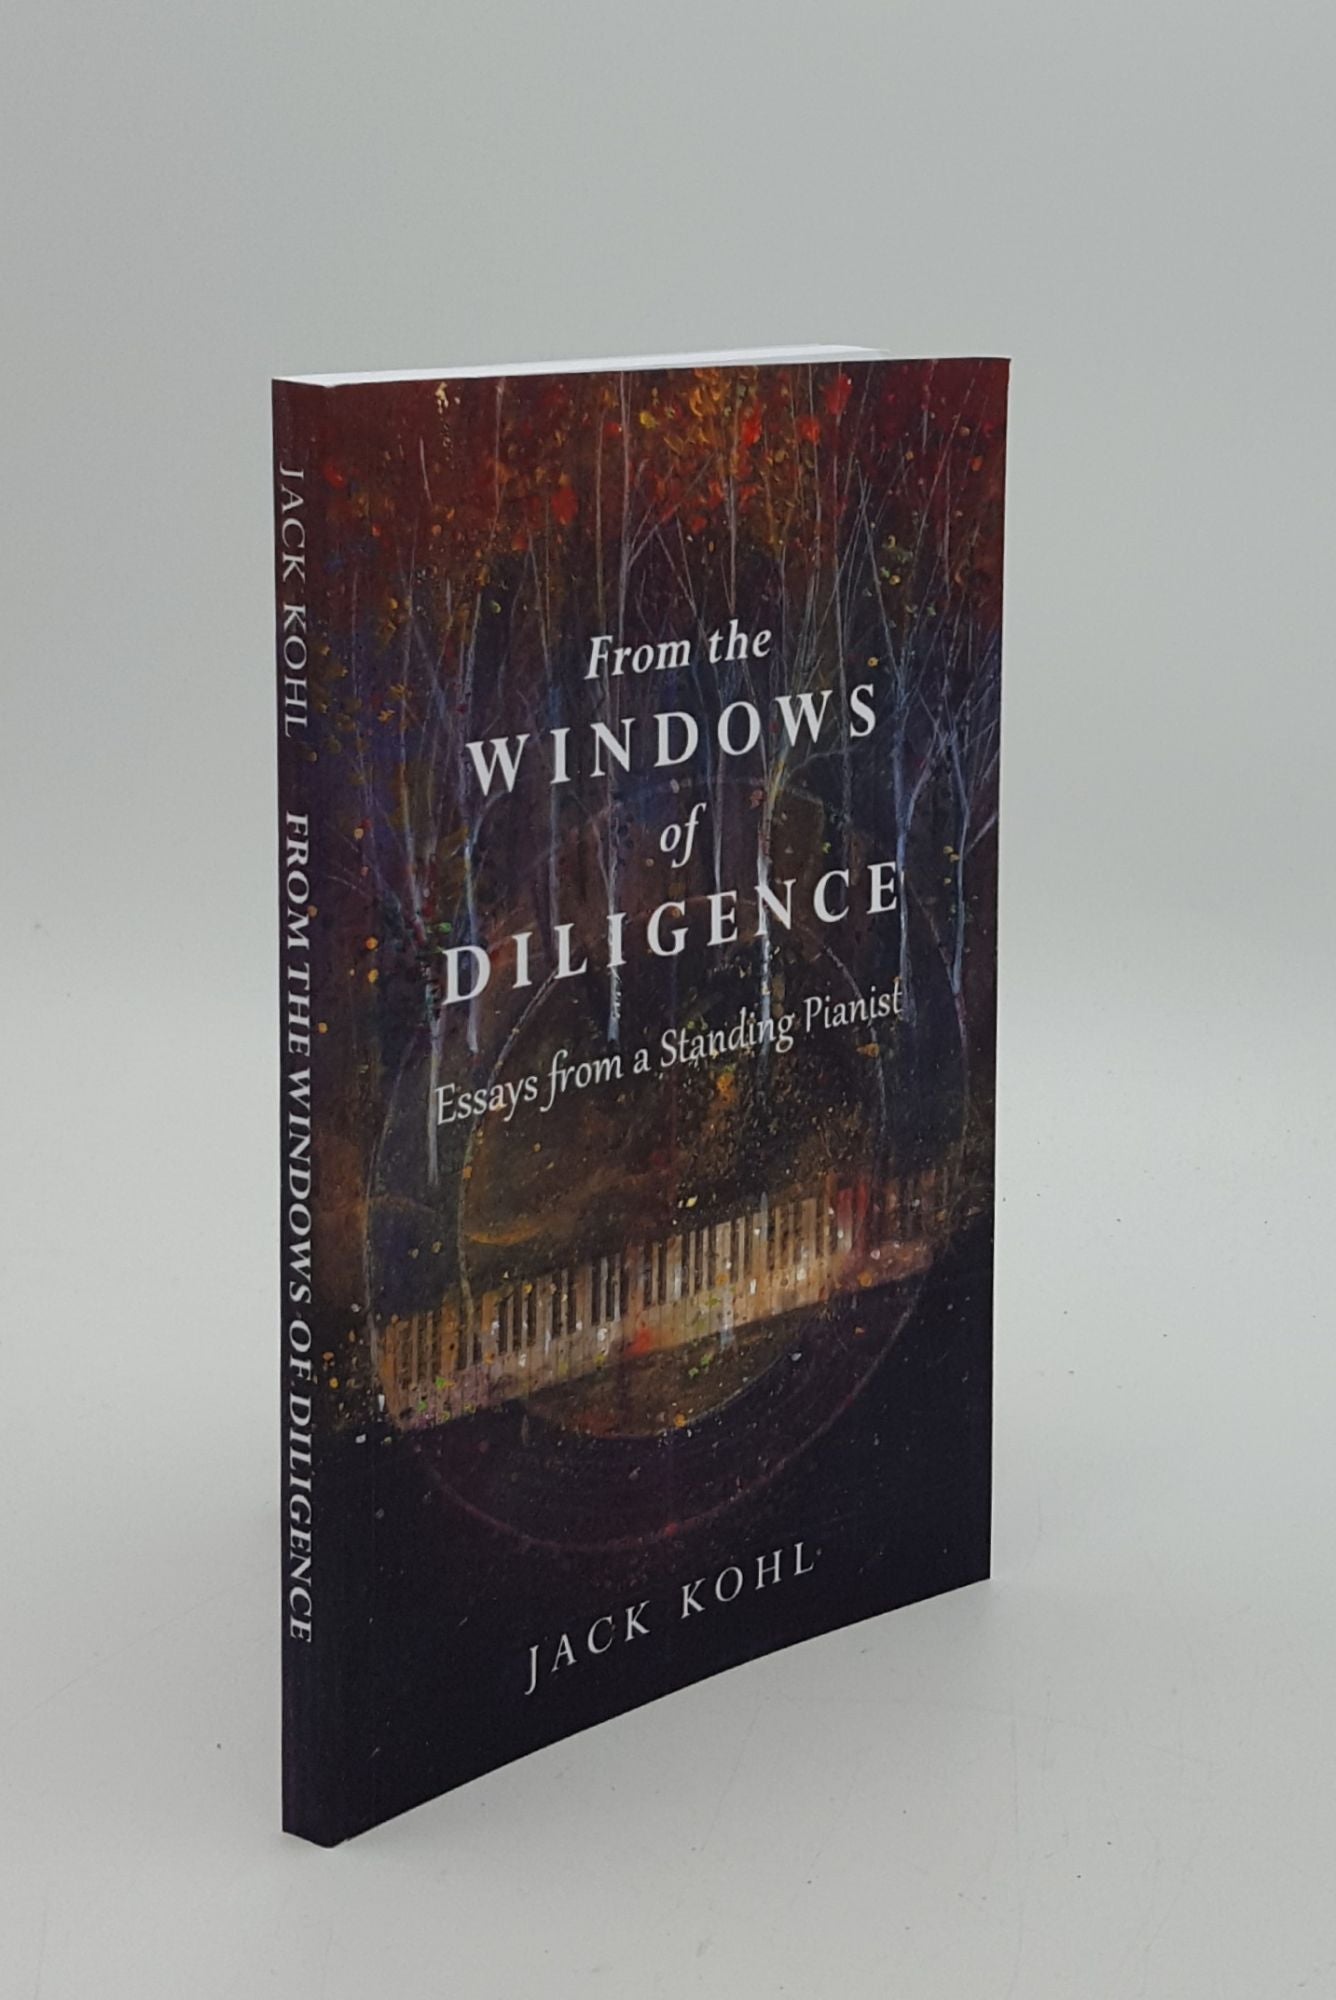 KOHL Jack - From the Windows of Diligence Essays from a Standing Pianist